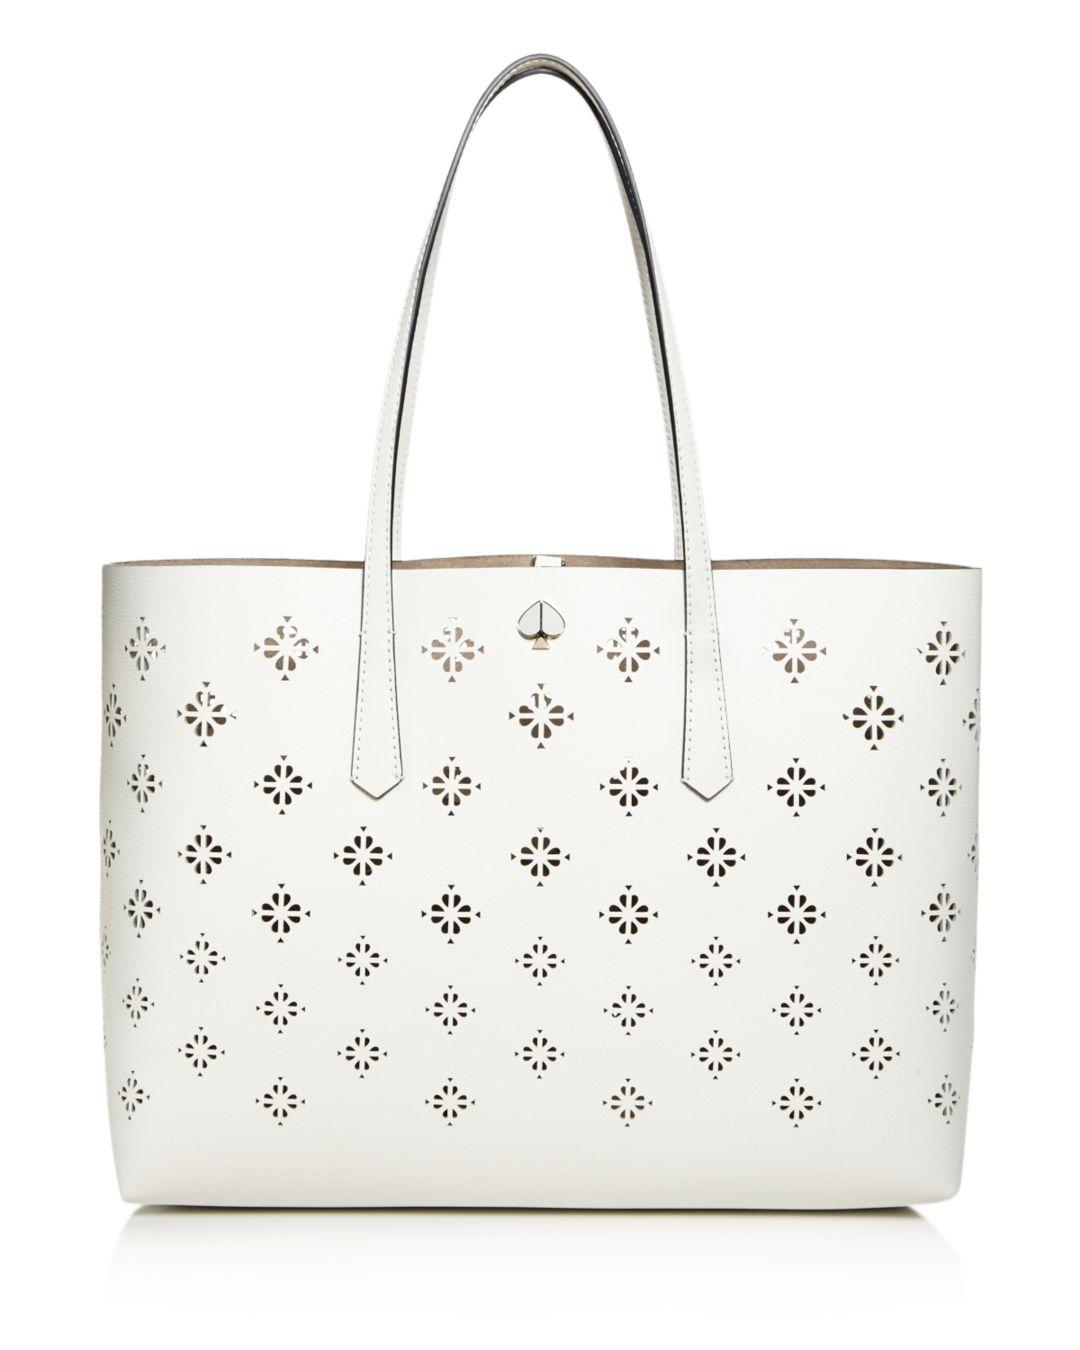 Kate Spade Large Floral Perforated Tote in White - Lyst